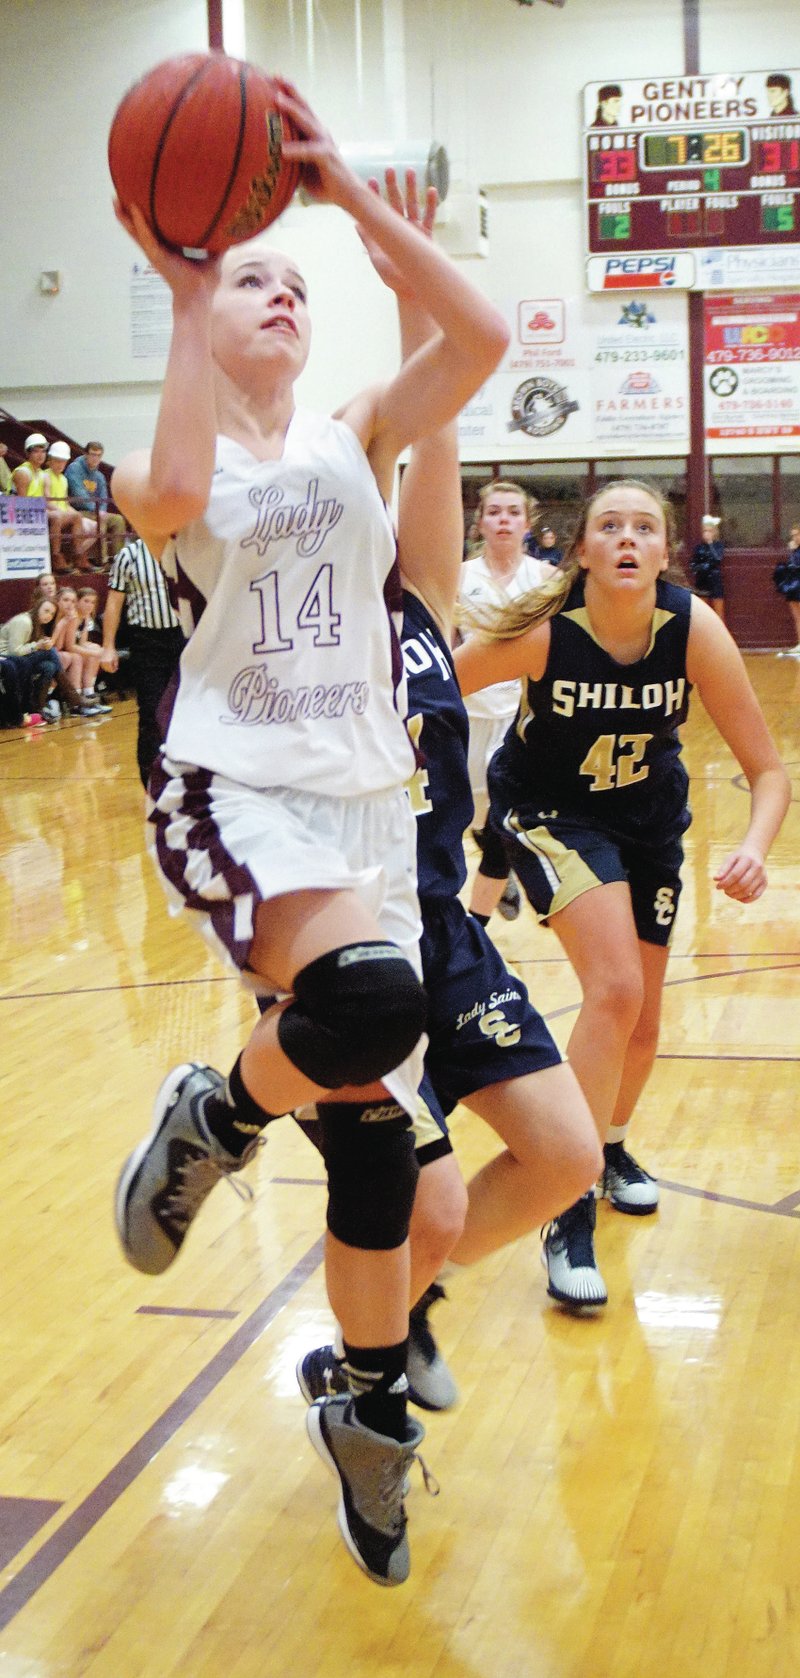 Photo by Randy Moll Amber Ellis goes up for two in play against Shiloh Christian on Friday night at Gentry High School.